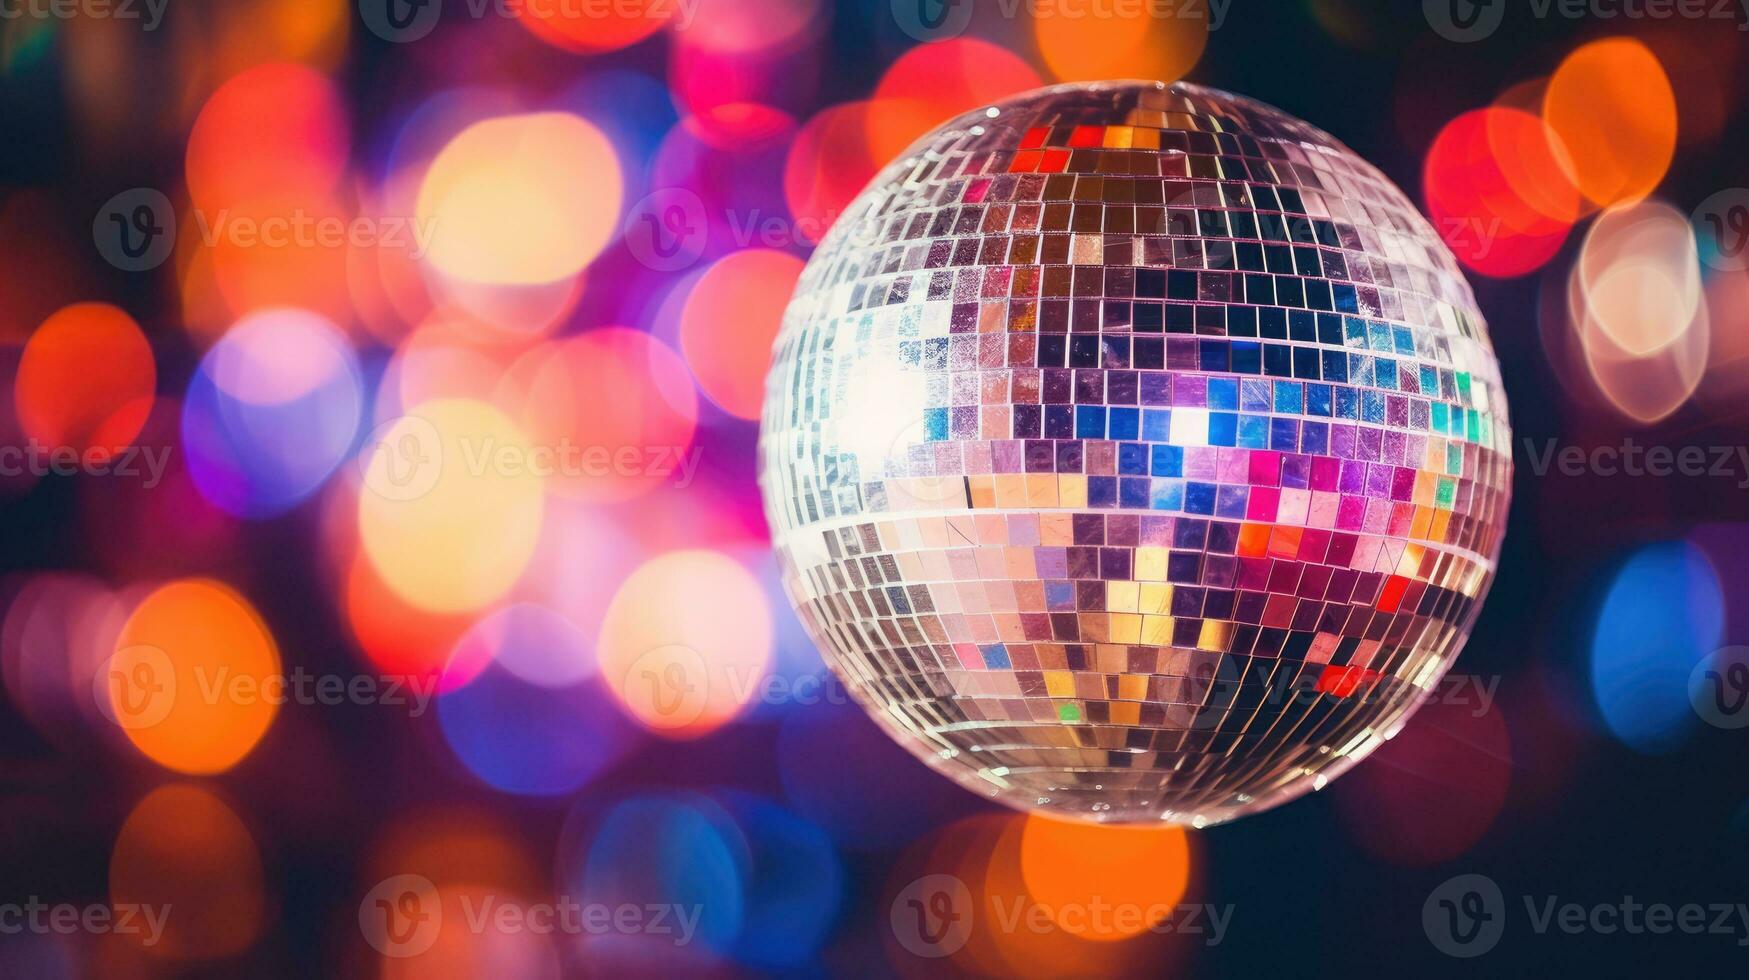 Colorful disco mirror ball lights night club background. Party lights disco ball photo